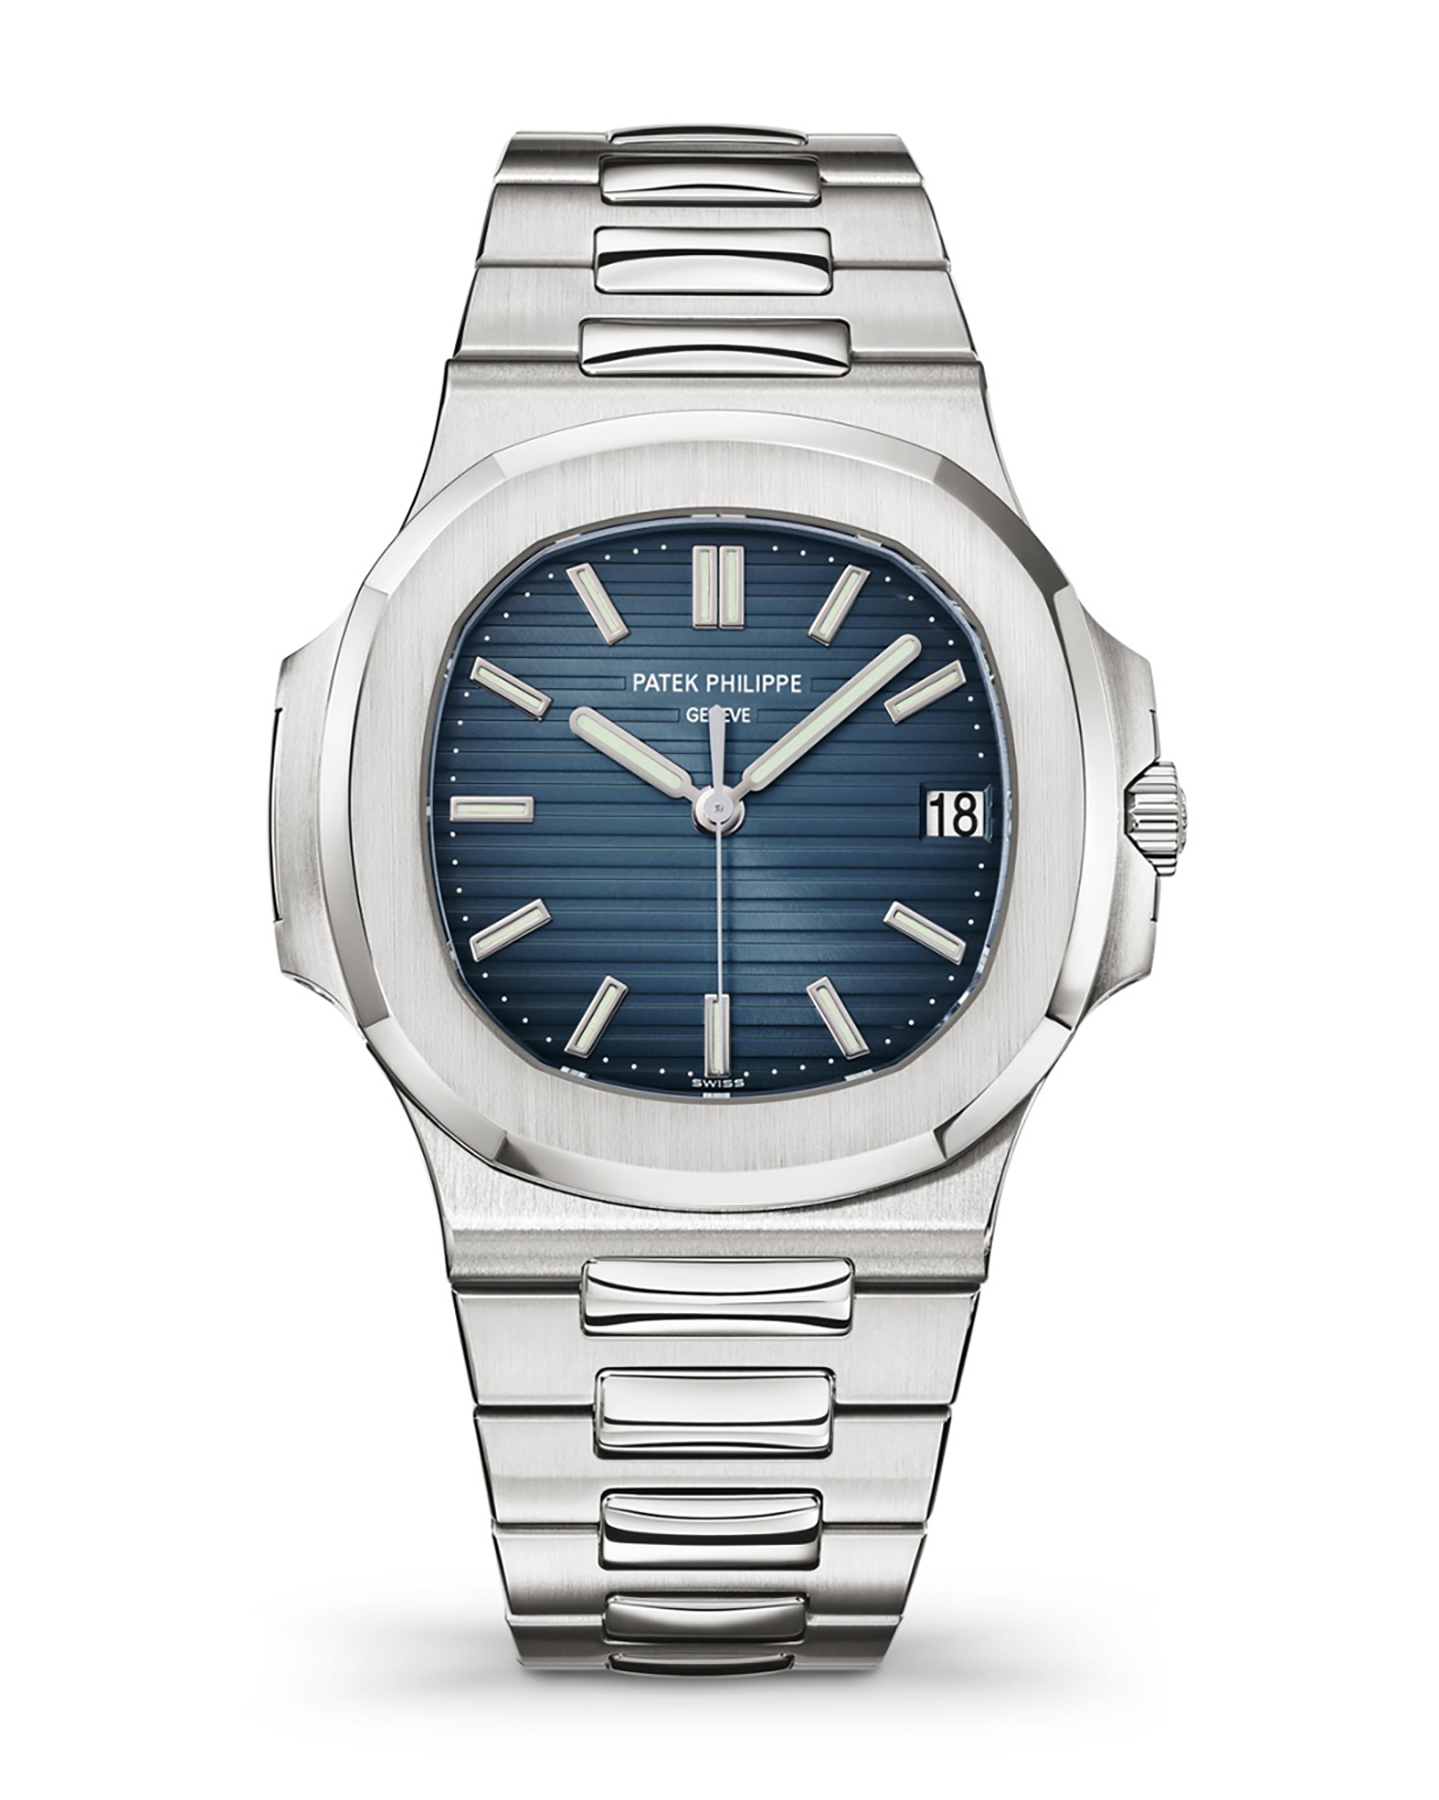 Recommendations for Understanding the Distinctive Identity of Patek Philippe and Rolex